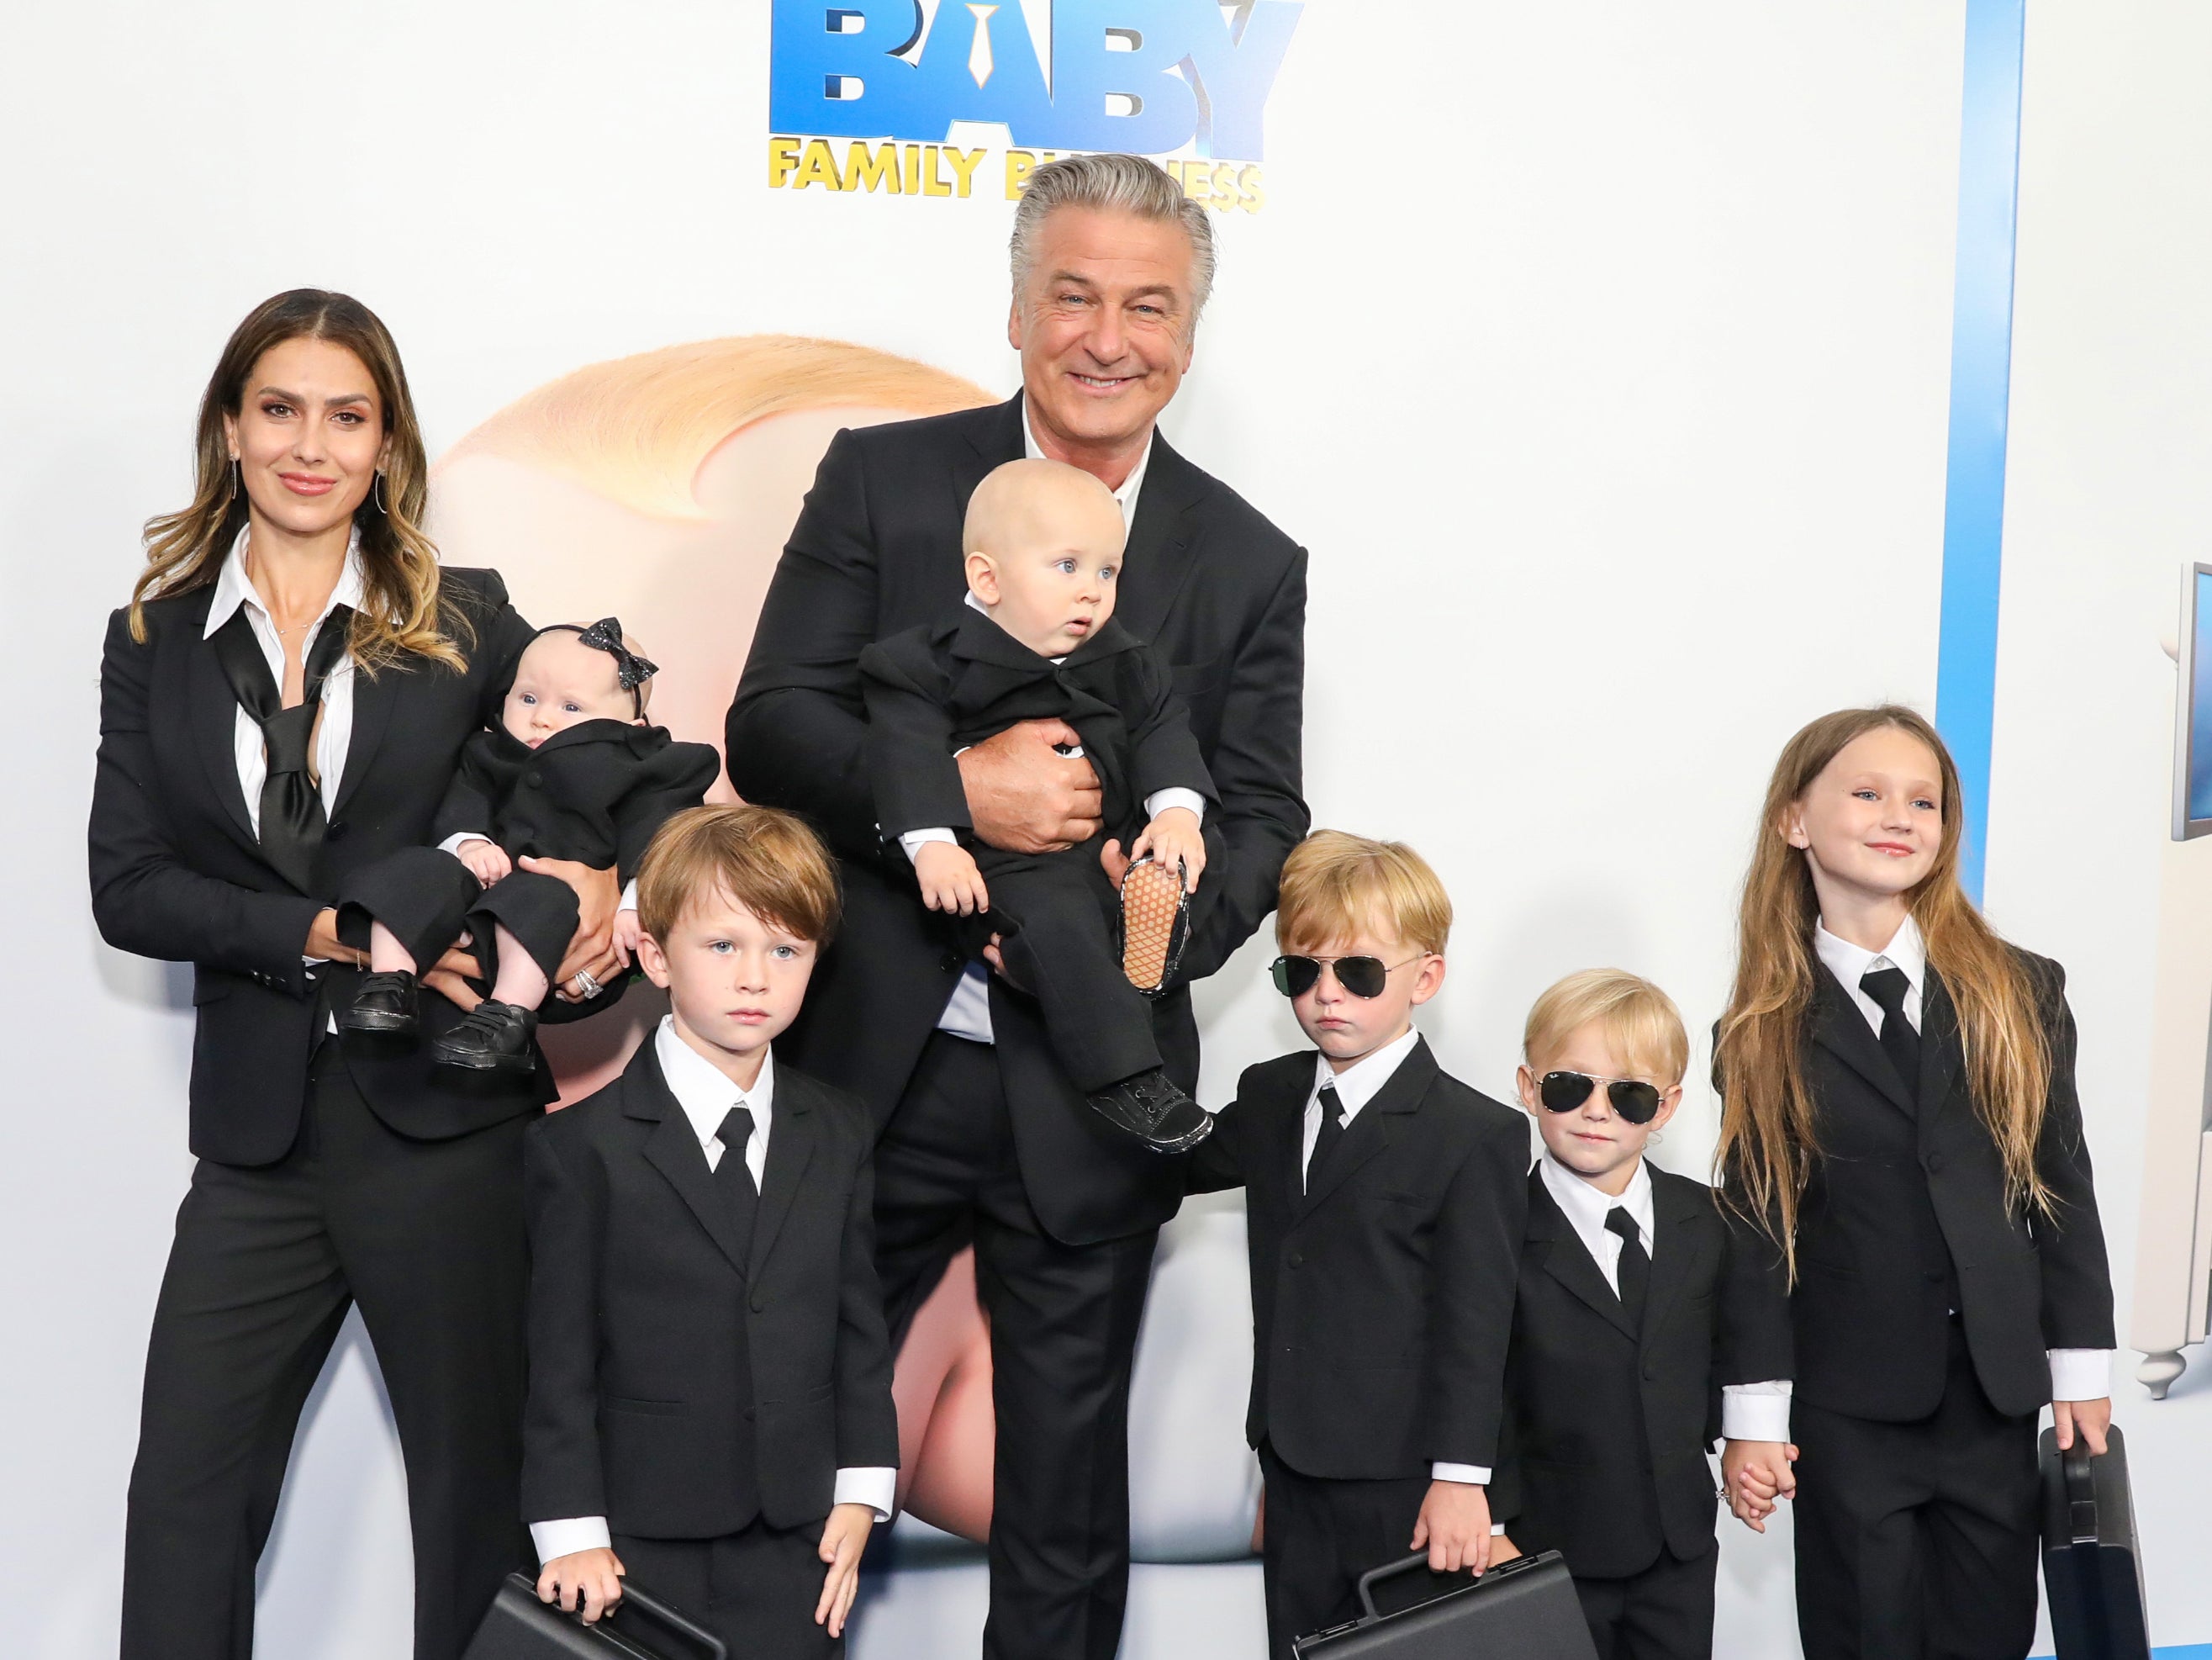 Hilaria and Alec Baldwin and their children